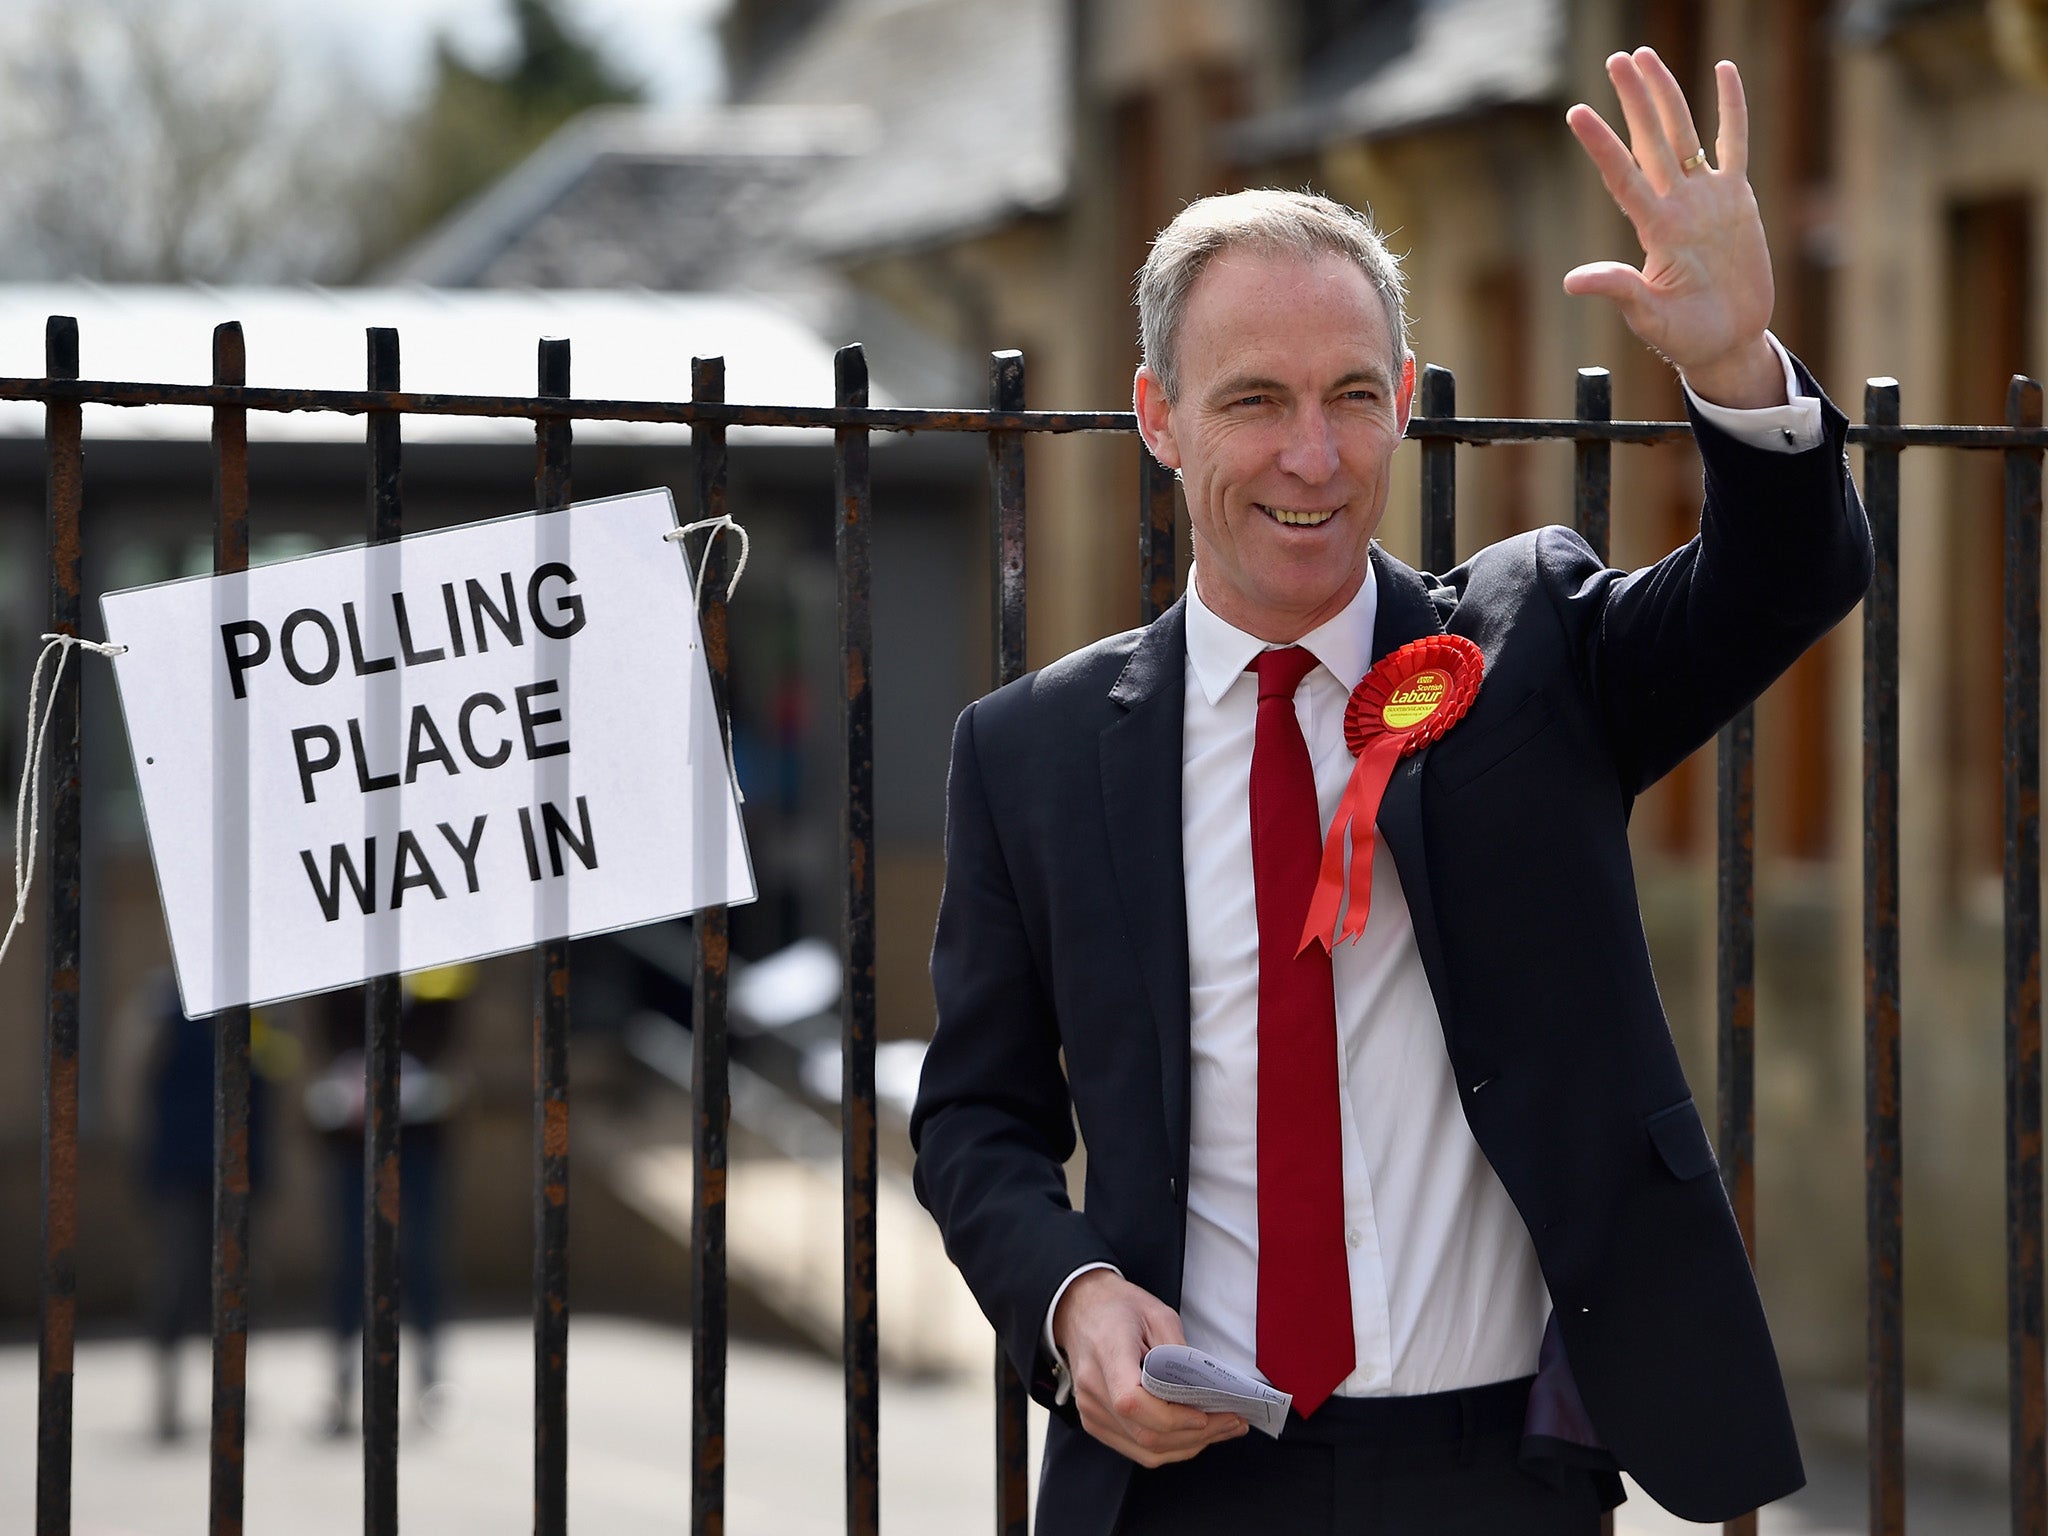 Jim Murphy said his party had “lacked a clear message” in its battle against the SNP, had not been “radical enough” and had failed to reflect Scotland’s new found mood of “confidence and optimism”. (Jeff J Mitch